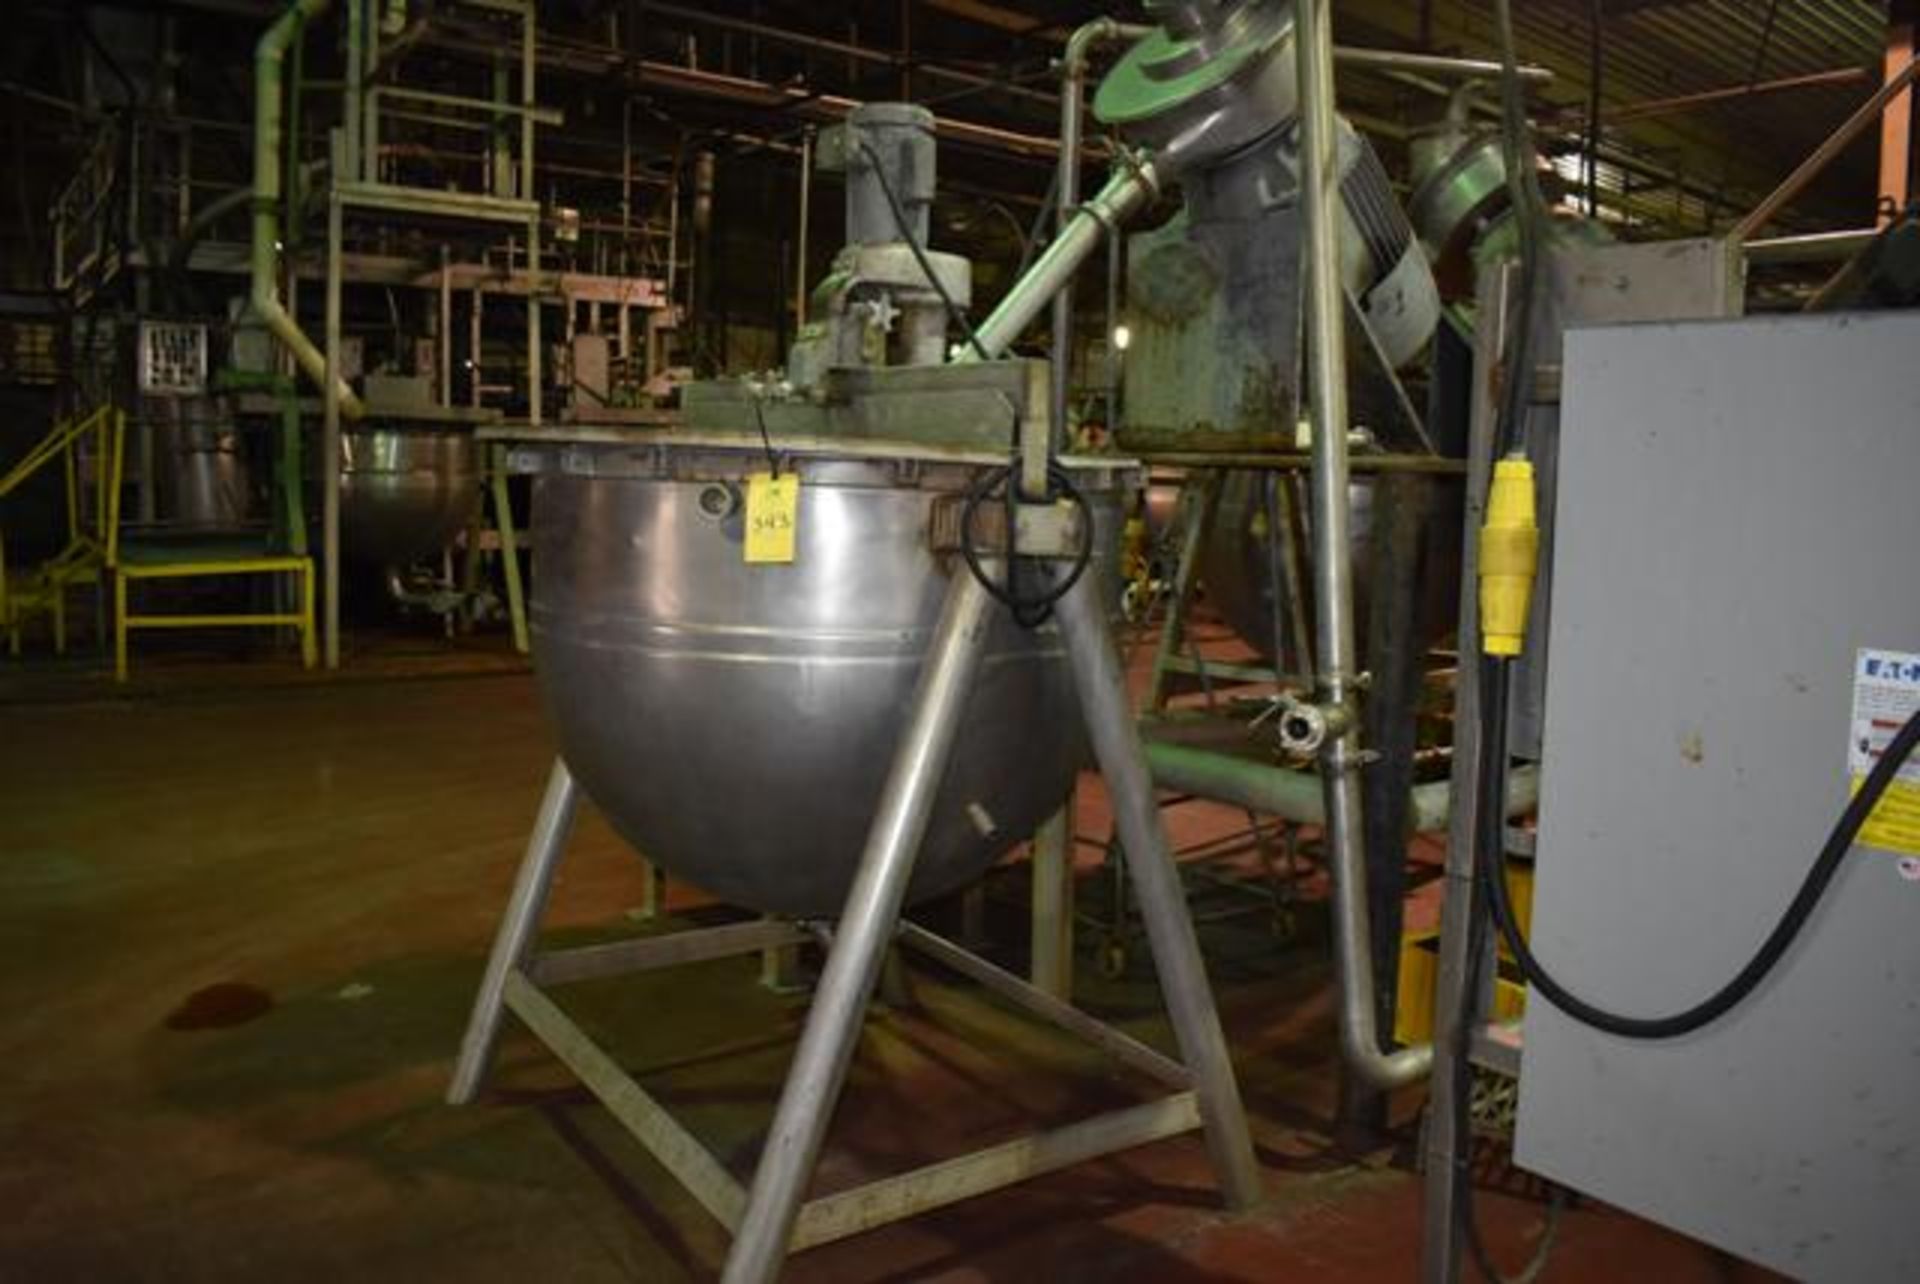 Lee SS Jacketed Kettle, Rated 200 Gallon Capacity, Includes Mixer